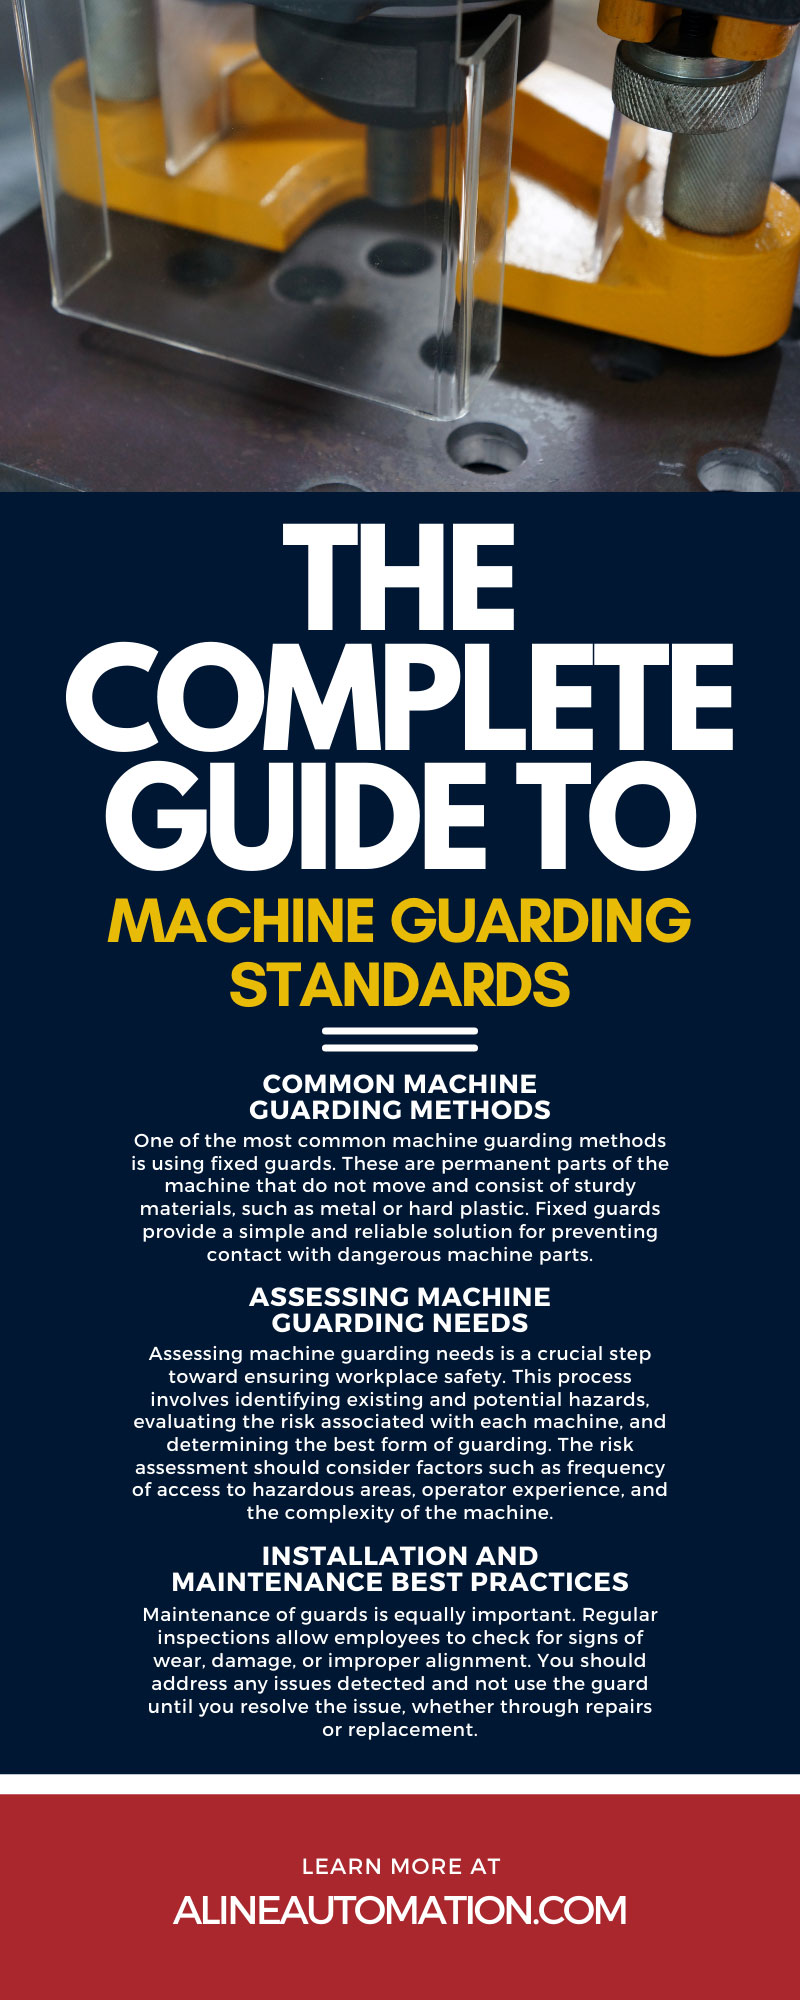 The Complete Guide To Machine Guarding Standards